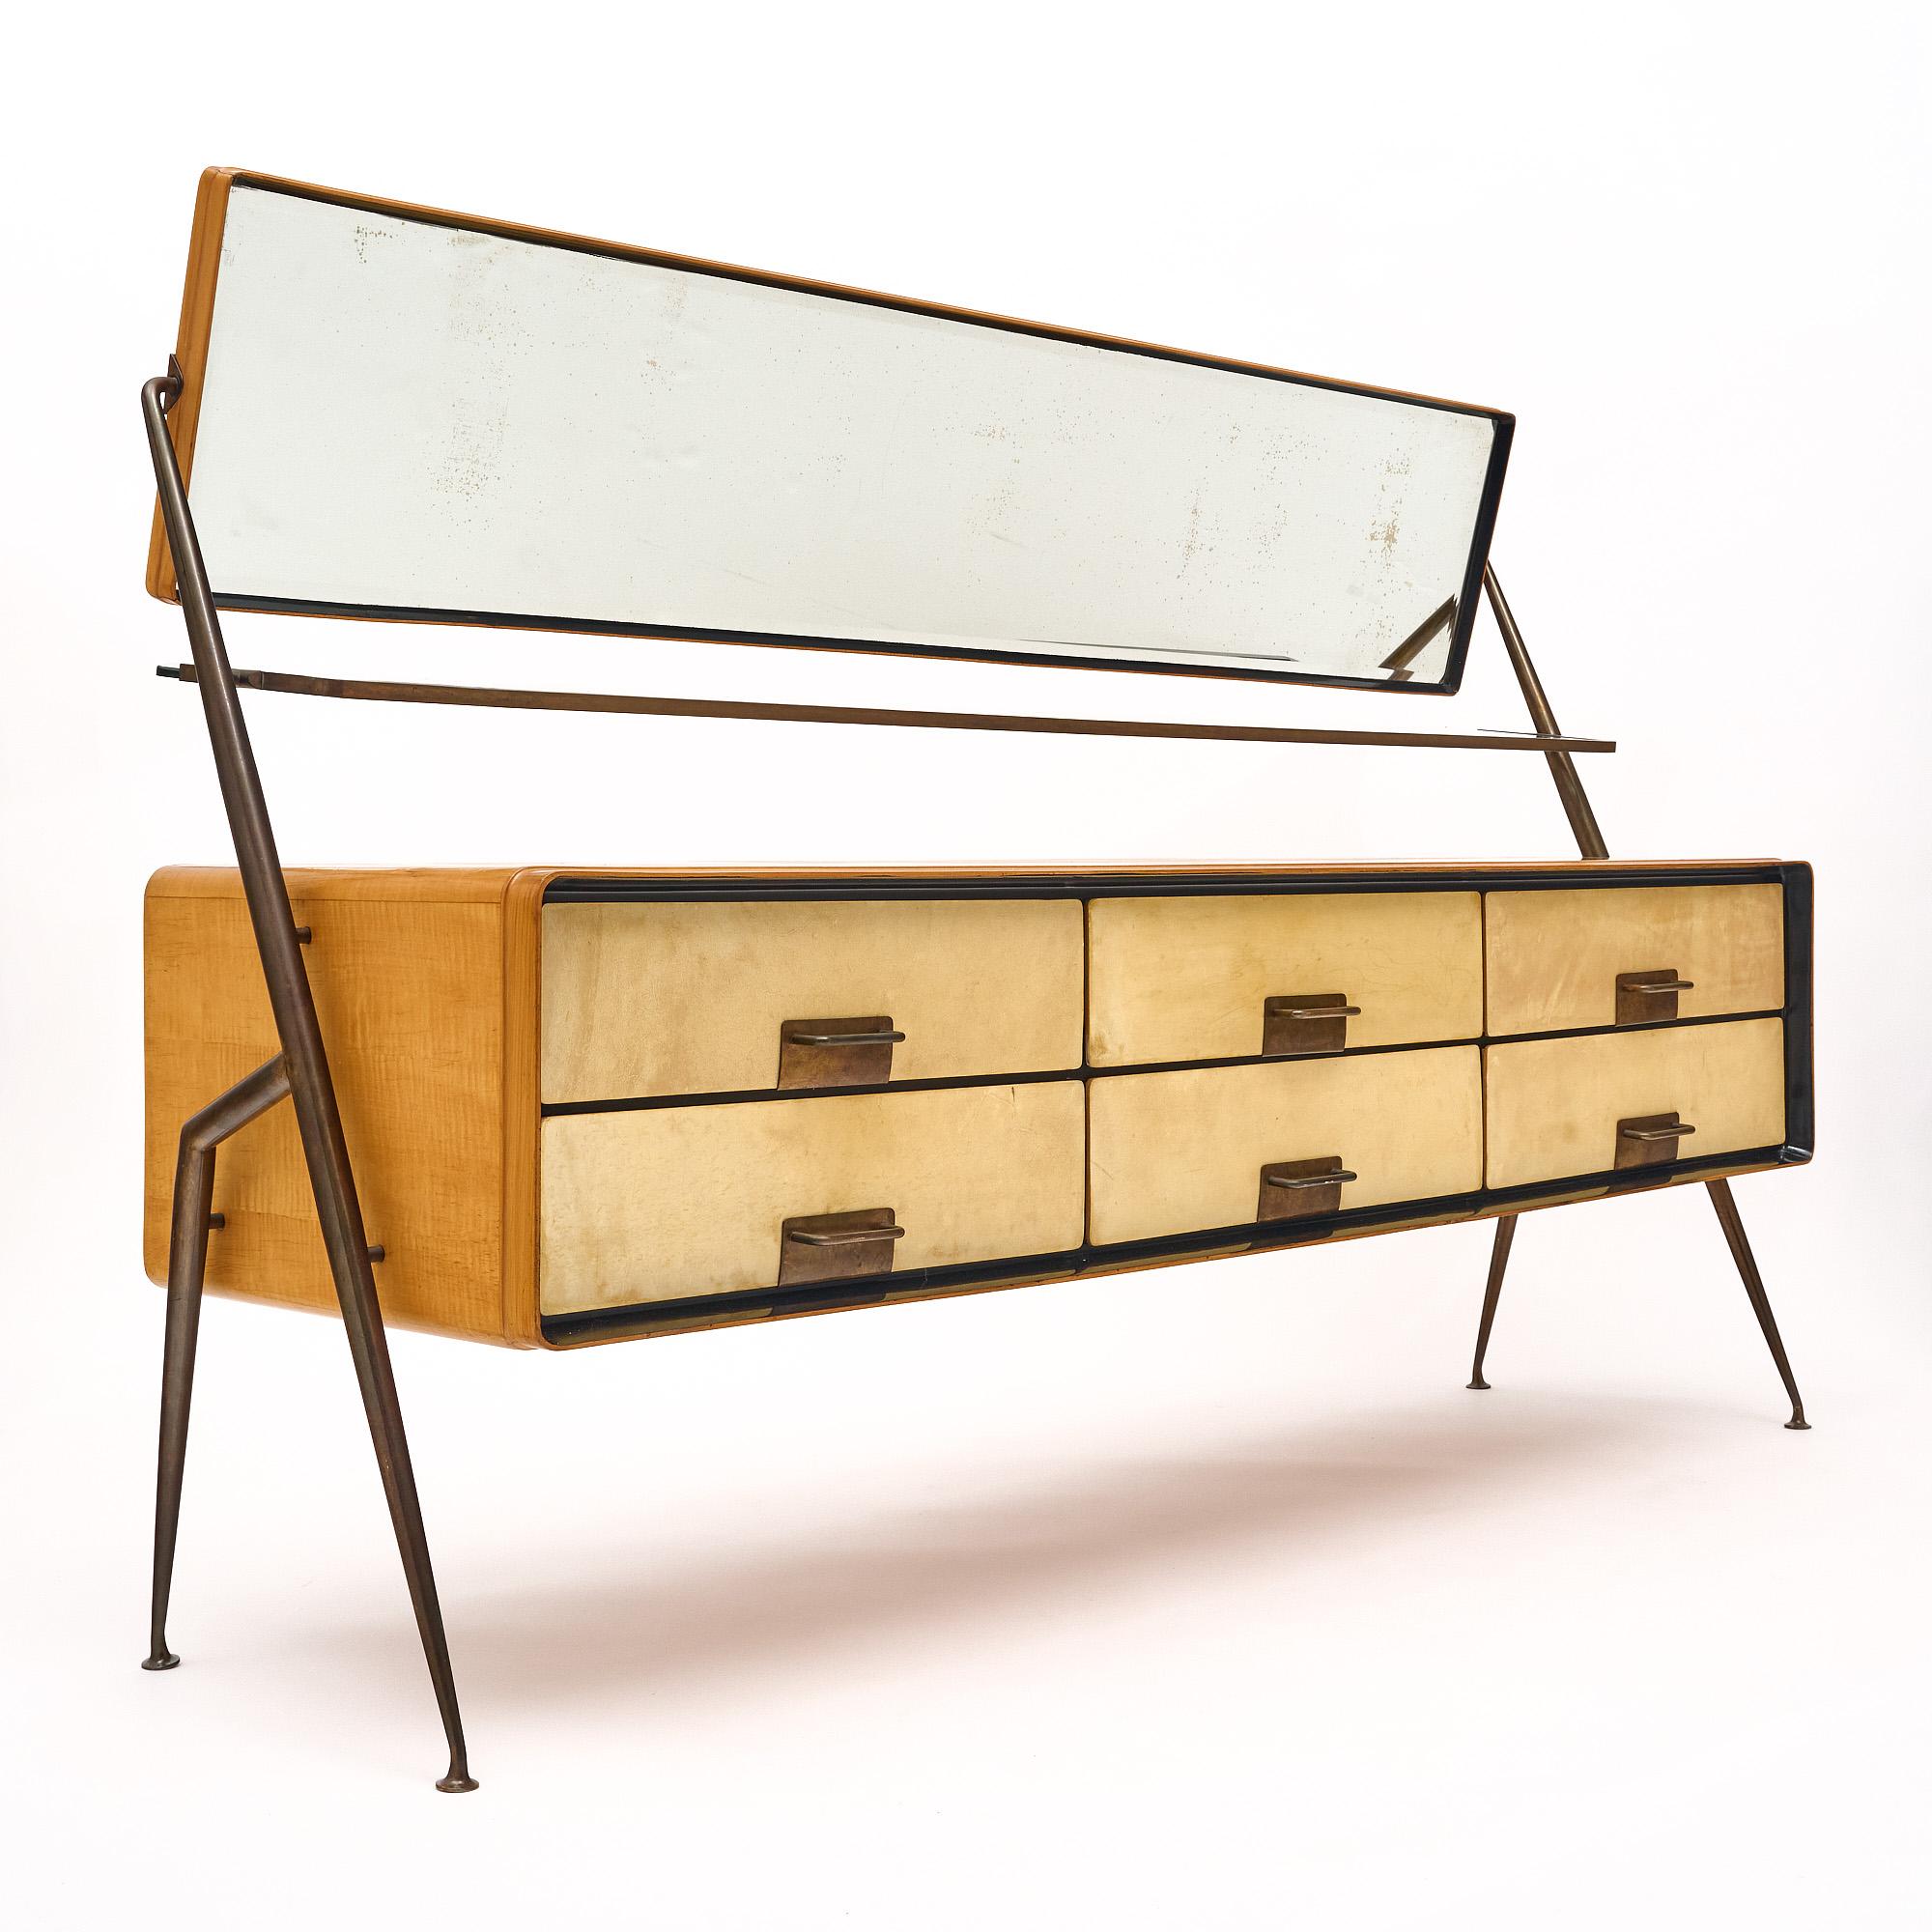 Chest of drawers/vanity, from Italy, by Silvio Cavatorta. This piece is made of maple with six dovetailed drawers. This sophisticated cabinet features a reclining beveled mirror and a beveled glass shelf. the structure holding the main body of the